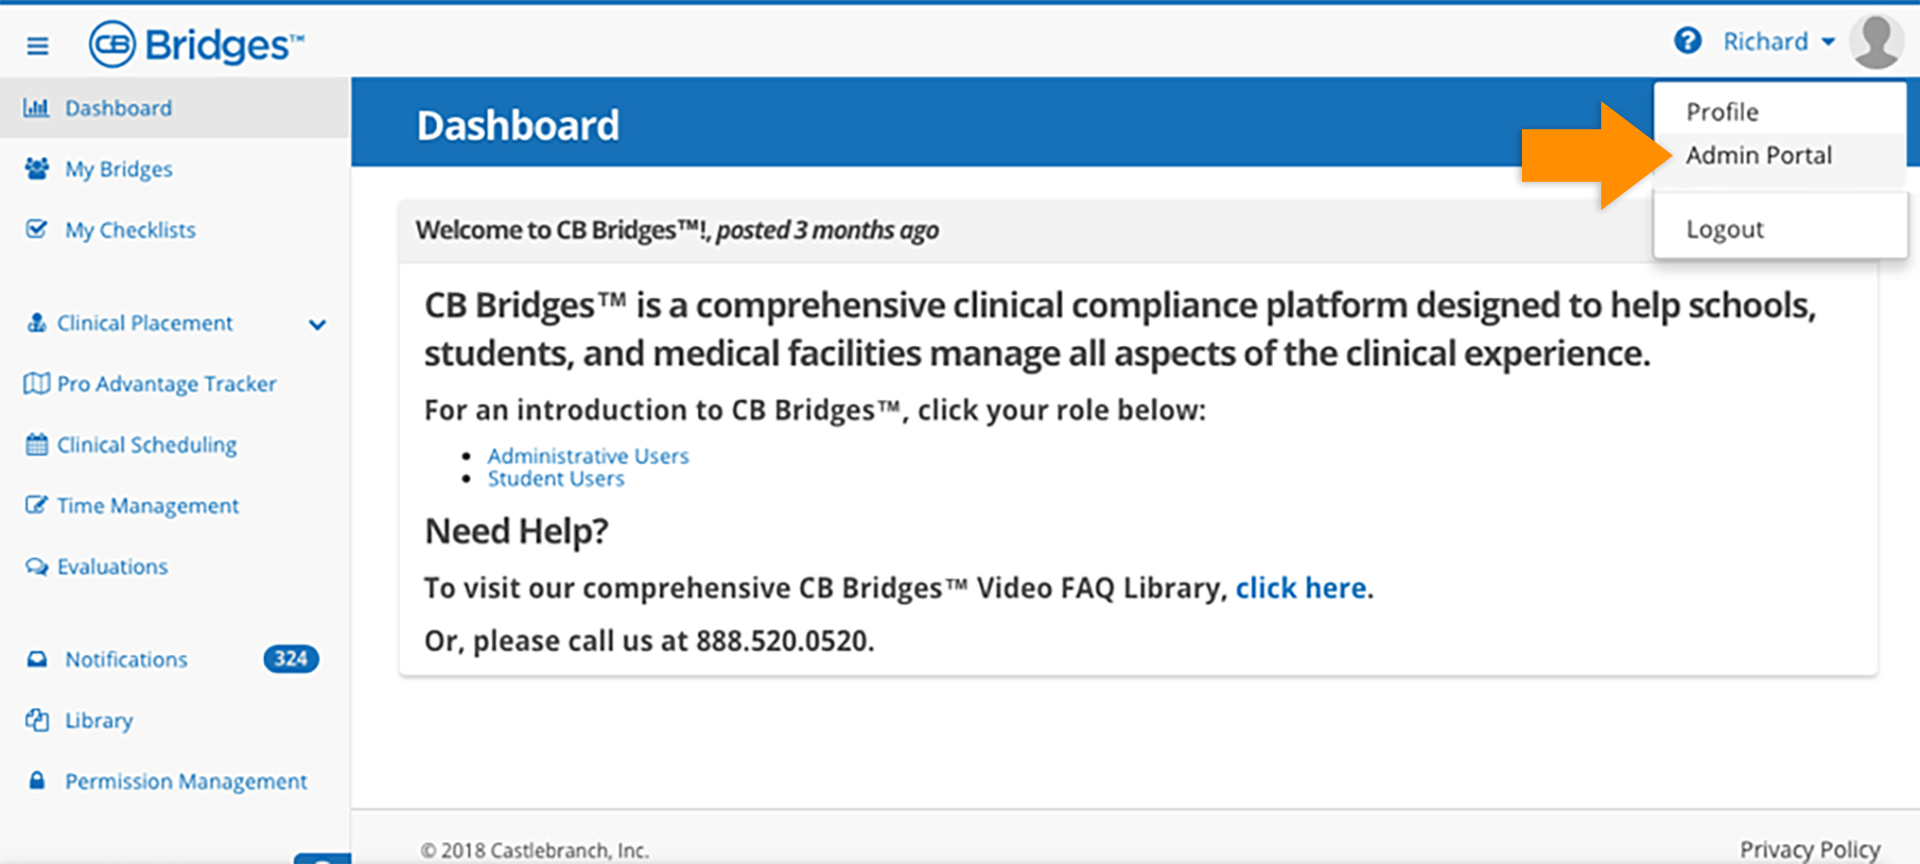 CB Bridges™ Clinical Placement myCB and AP to CB Bridges™ Single Sign On—Step 3: To navigate back to the Administrator Portal from CB Bridges™, users select their name in the top right corner and then select the Admin Portal button from dropdown menu.